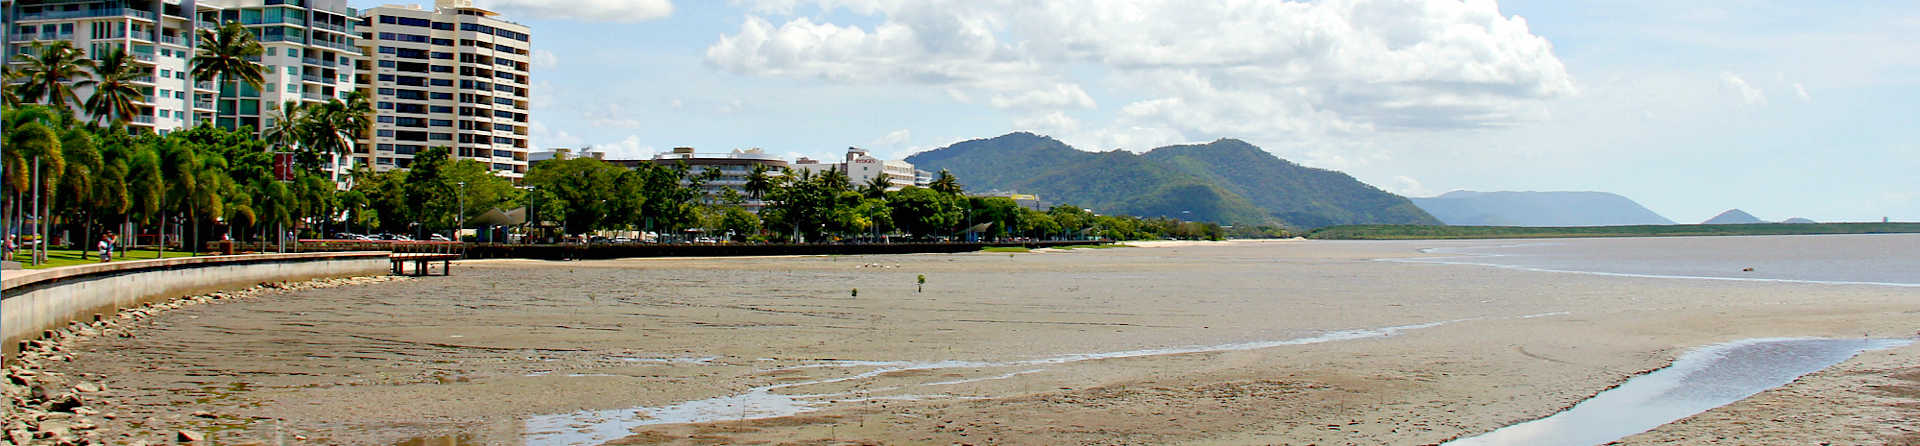 How do I spend a day in Cairns?